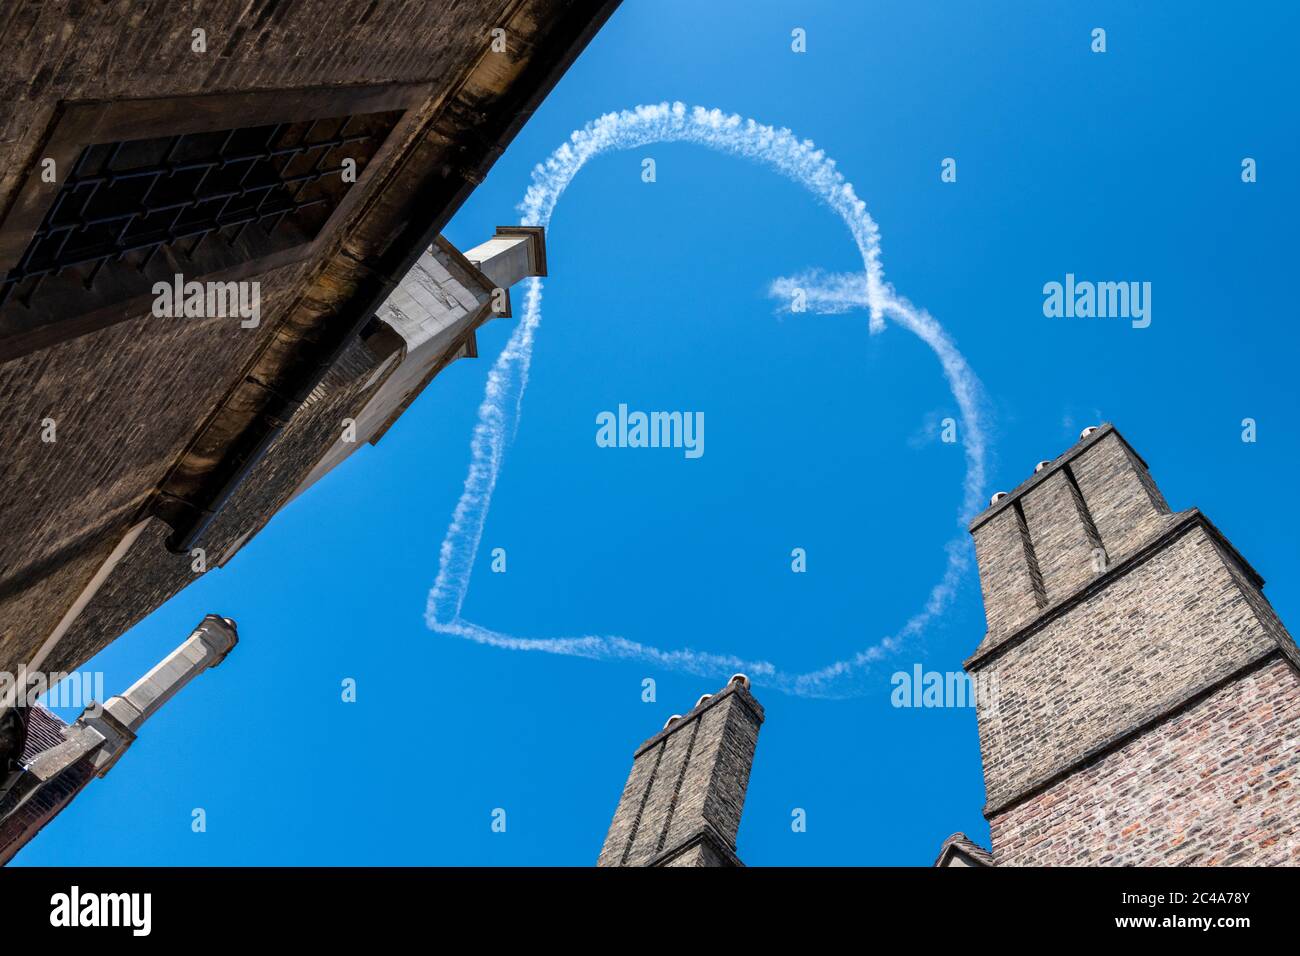 Cambridge, UK. 25th June, 2020. Aerial sign writing or skywriting- an aeroplane draws a heart in a white smoke trail above the historic Cambridge University buildings in the blue sky. Love Cambridge! Credit: Julian Eales/Alamy Live News Stock Photo